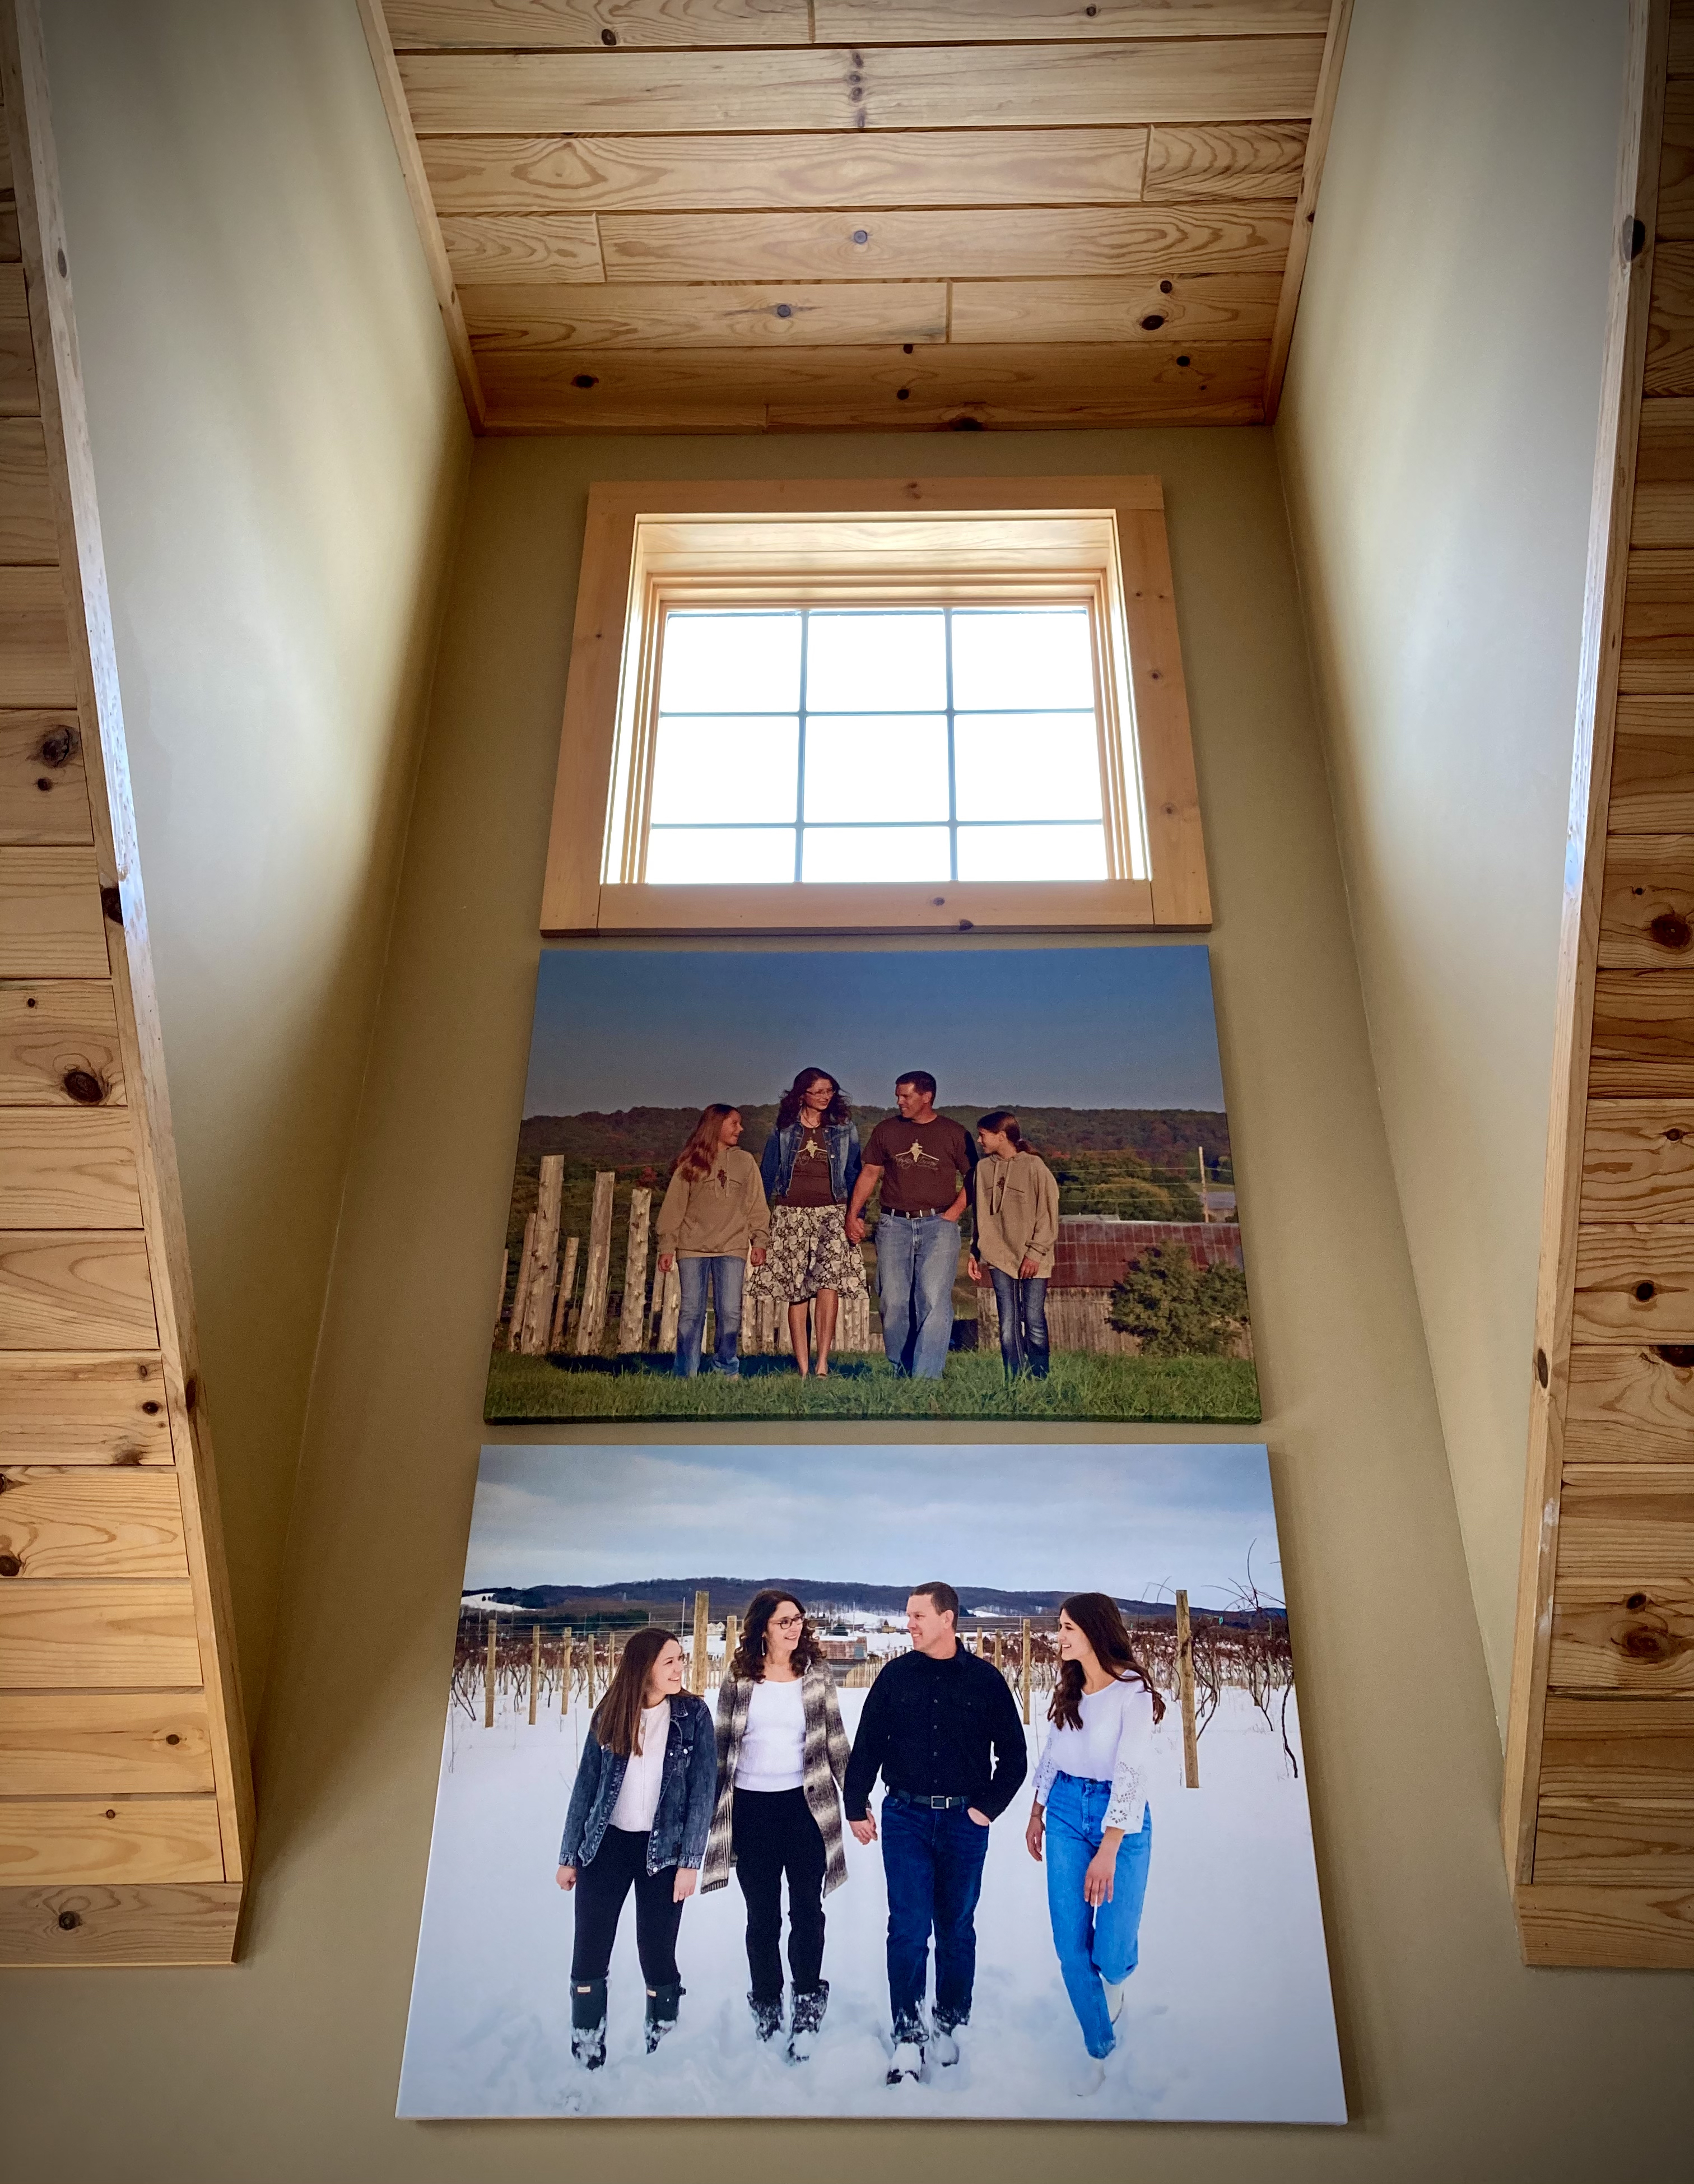 Two canvas photos of the Roush family, one from 2014 and one from 2022.